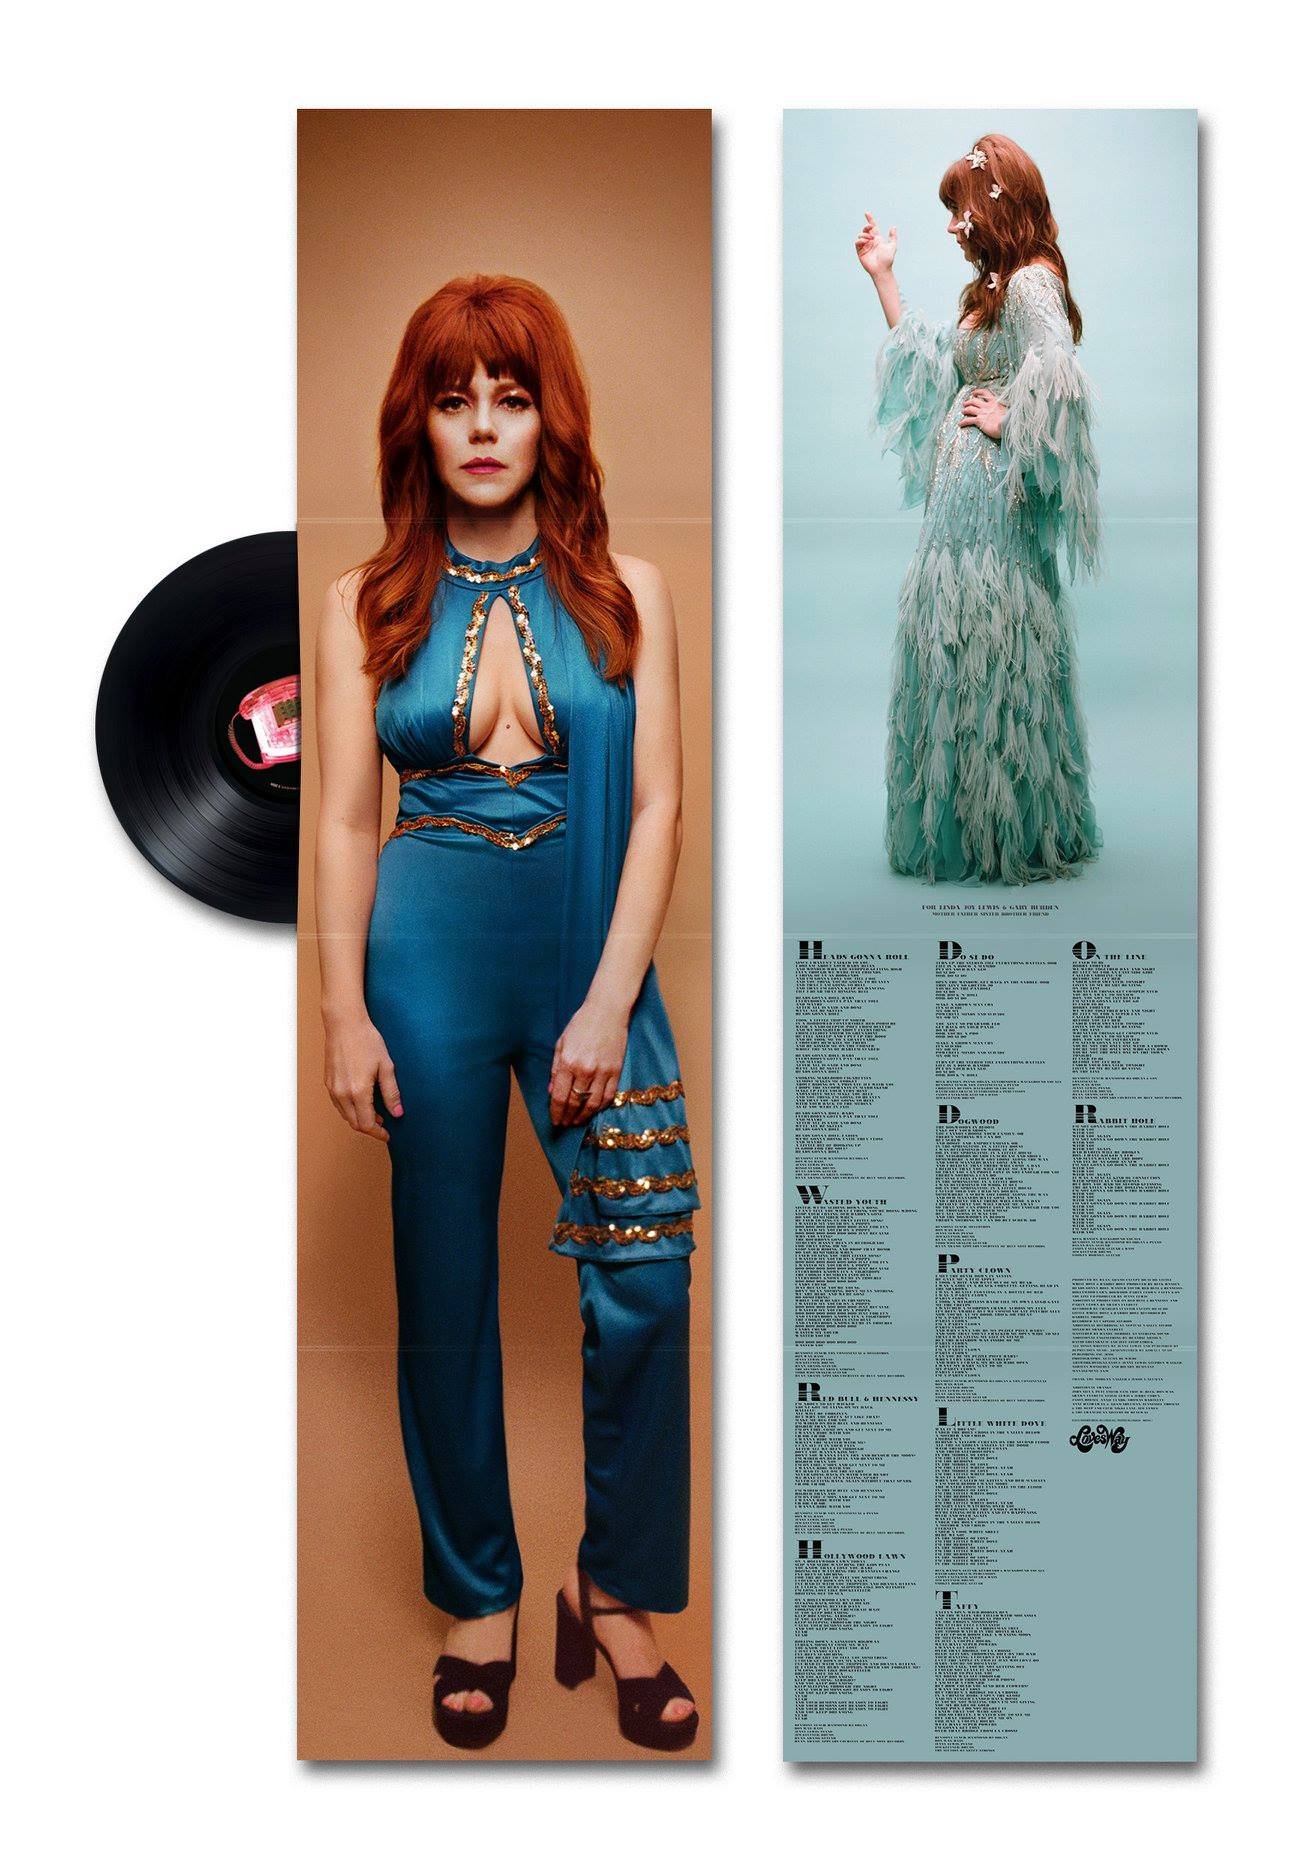 Jenny Lewis “On The Line” Record Sleeve